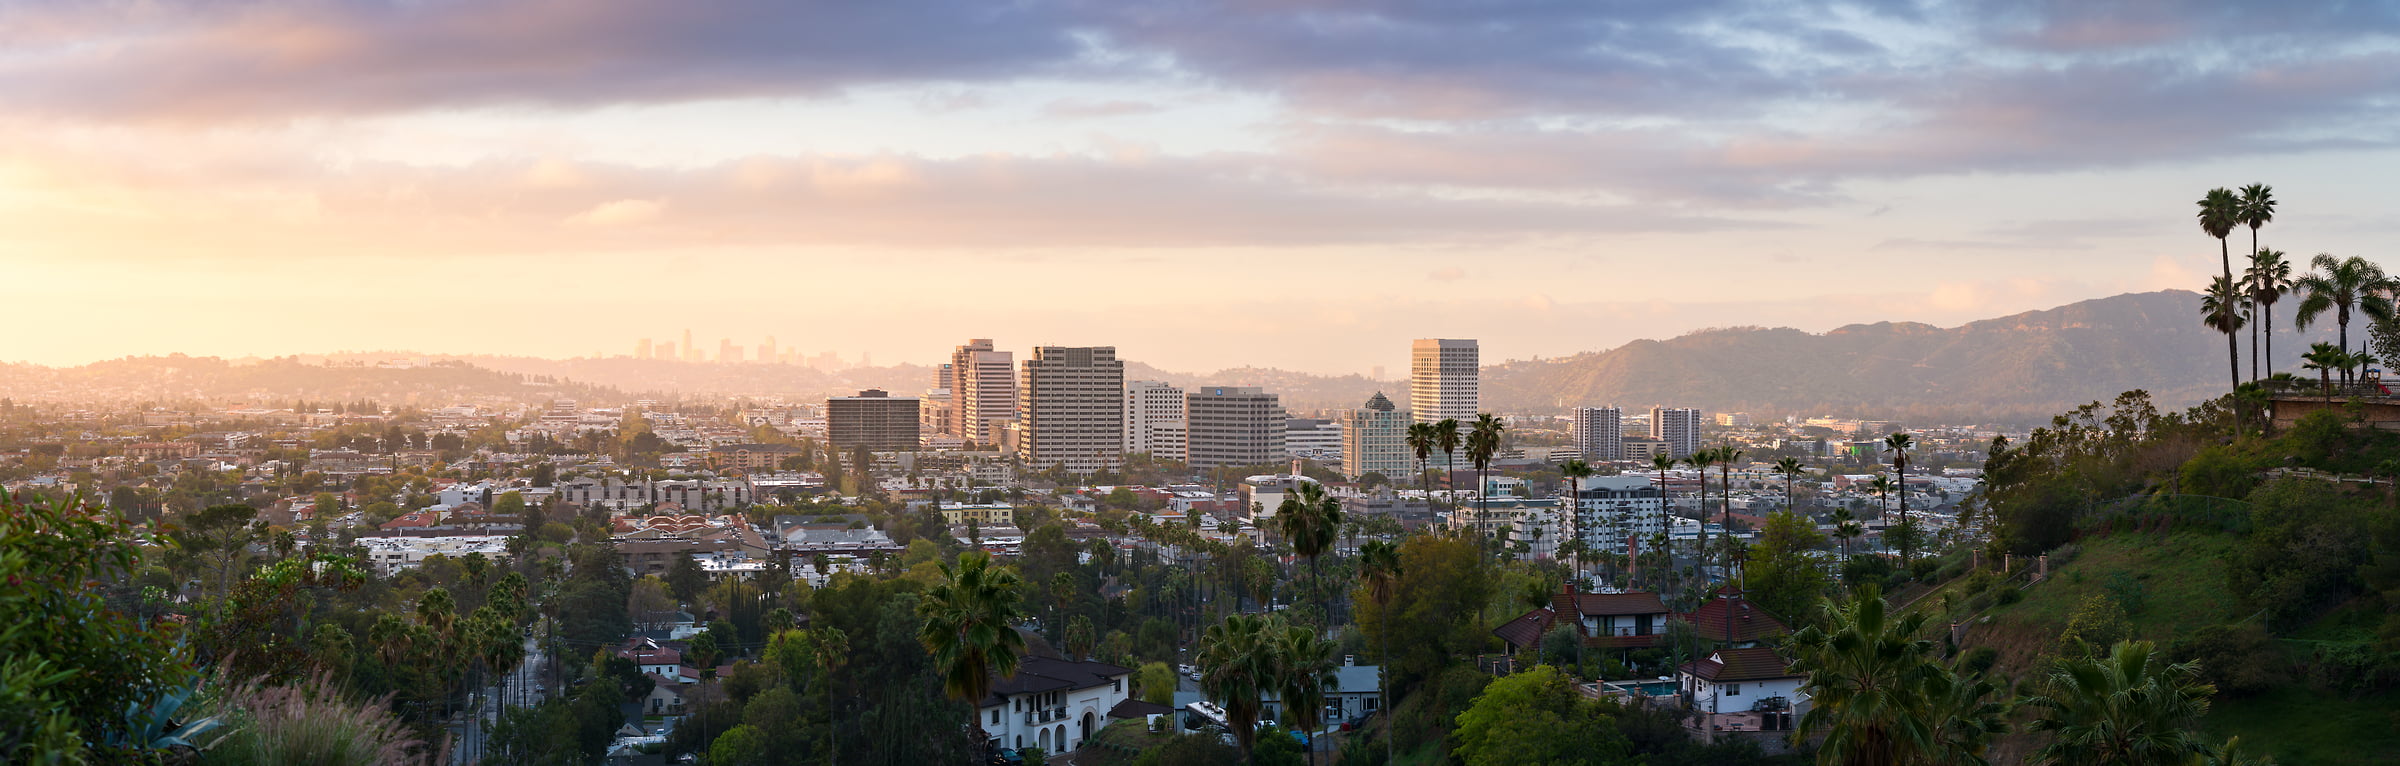 322 megapixels! A very high resolution, large-format VAST photo print of Glendale, California at sunrise; cityscape photograph created by Jeff Lewis in Glendale, California